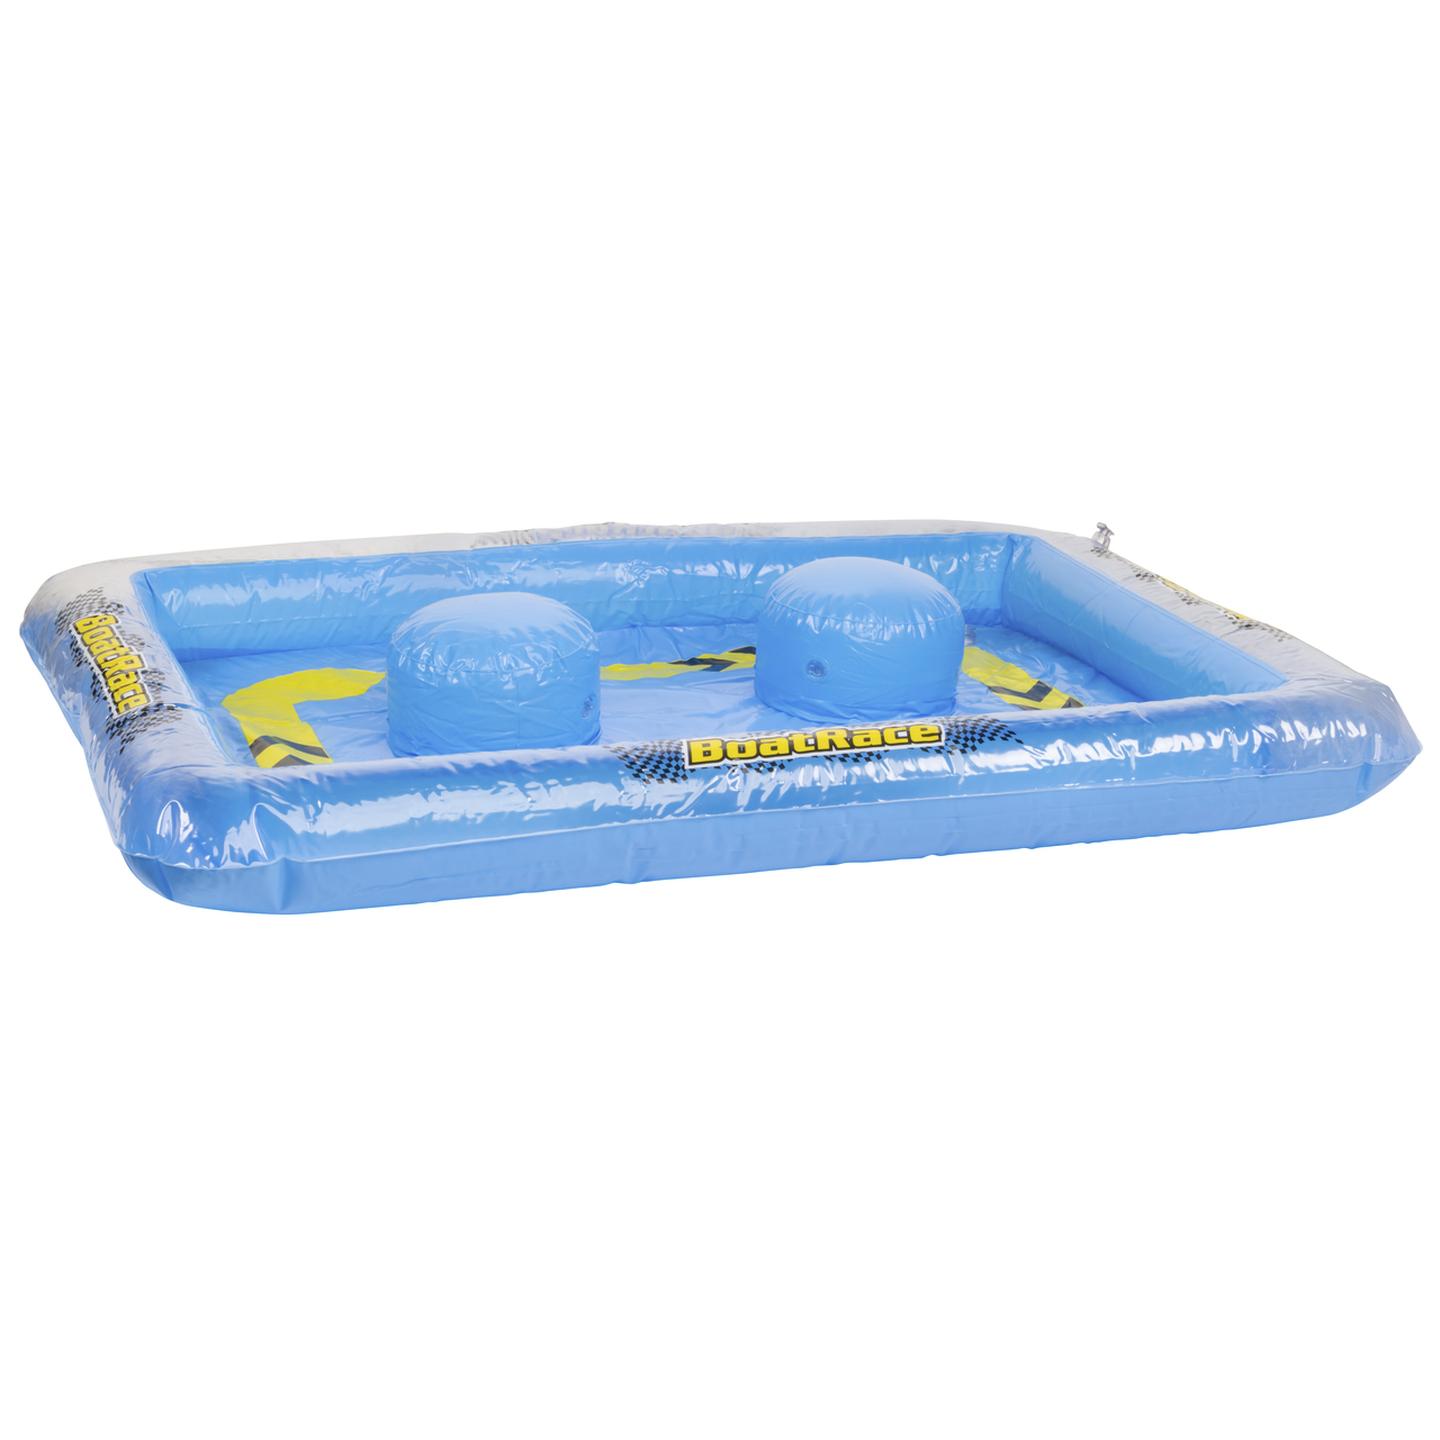 1:58 R/C Boat Twin Pack with Inflatable Pool